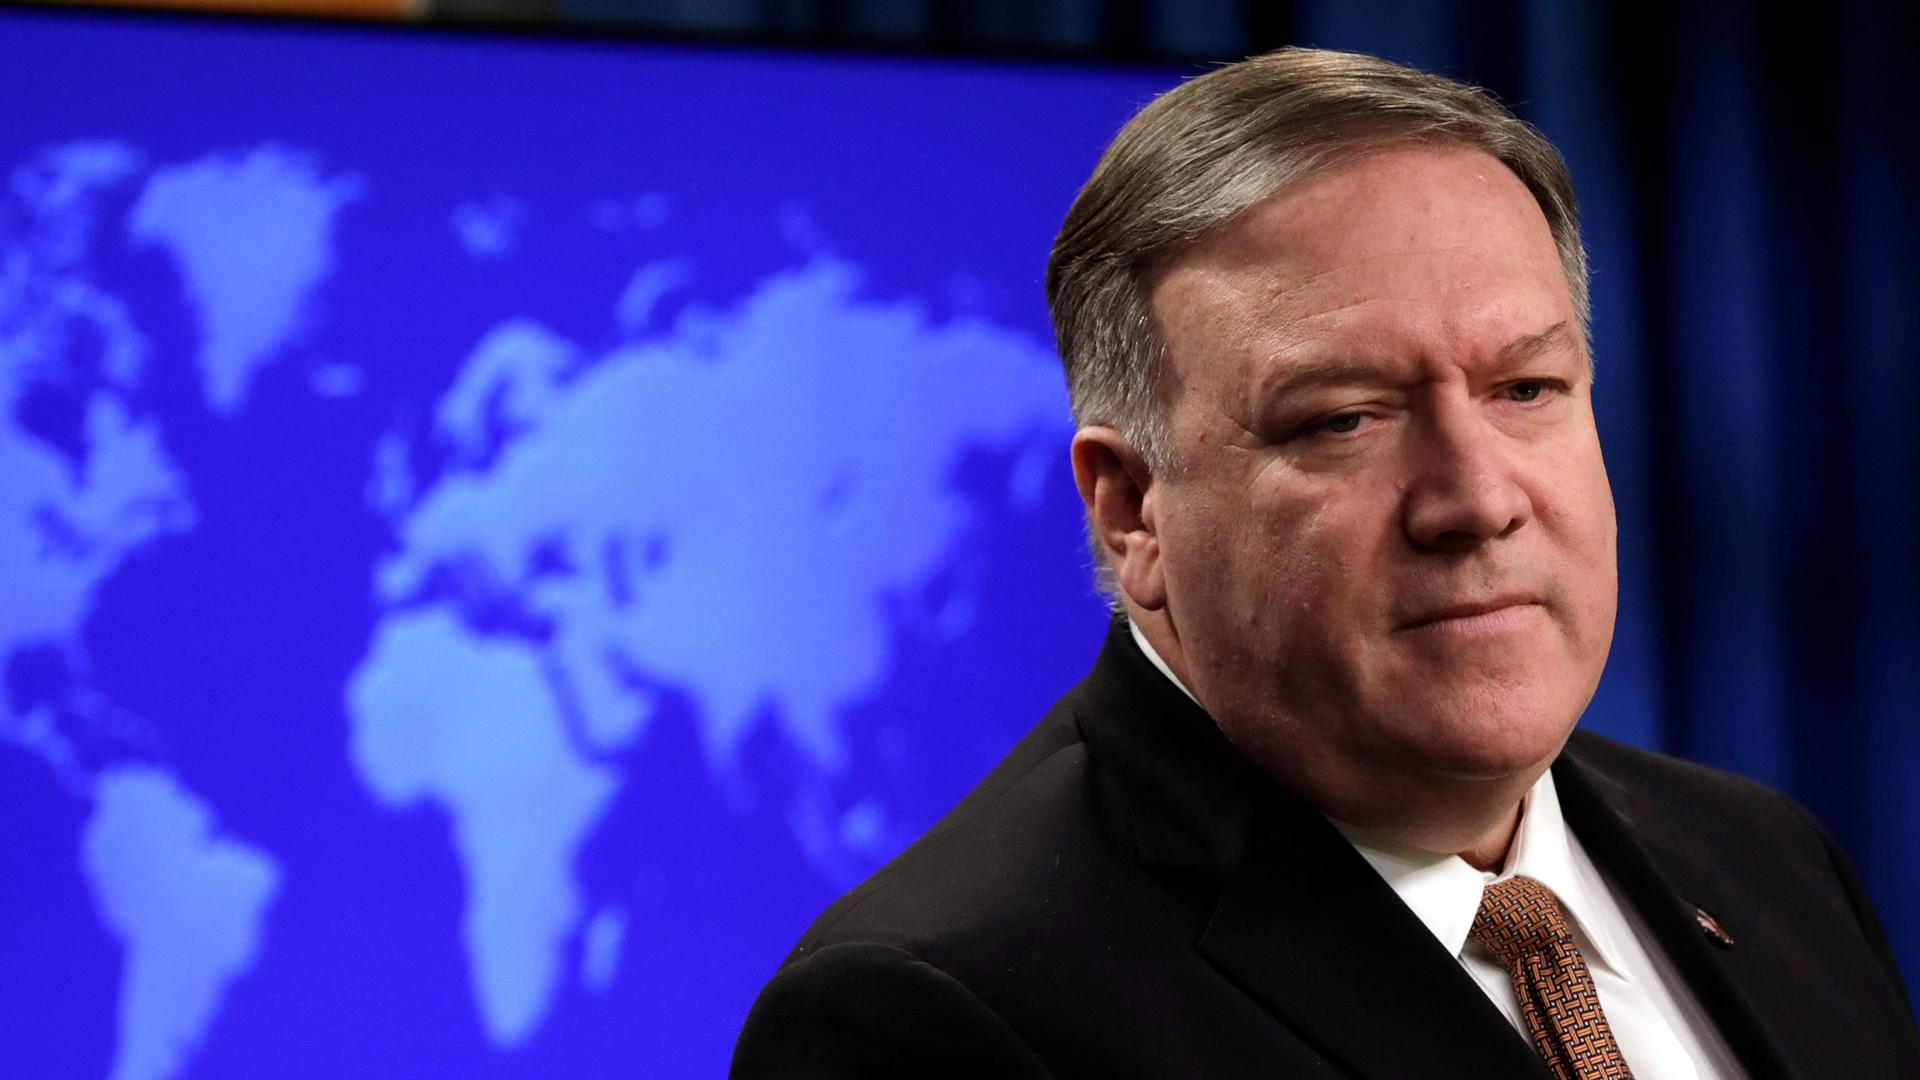 US Secretary of State Mike Pompeo is shown looking to his right and wearing a dark suit with a blue map of the globe behind him.